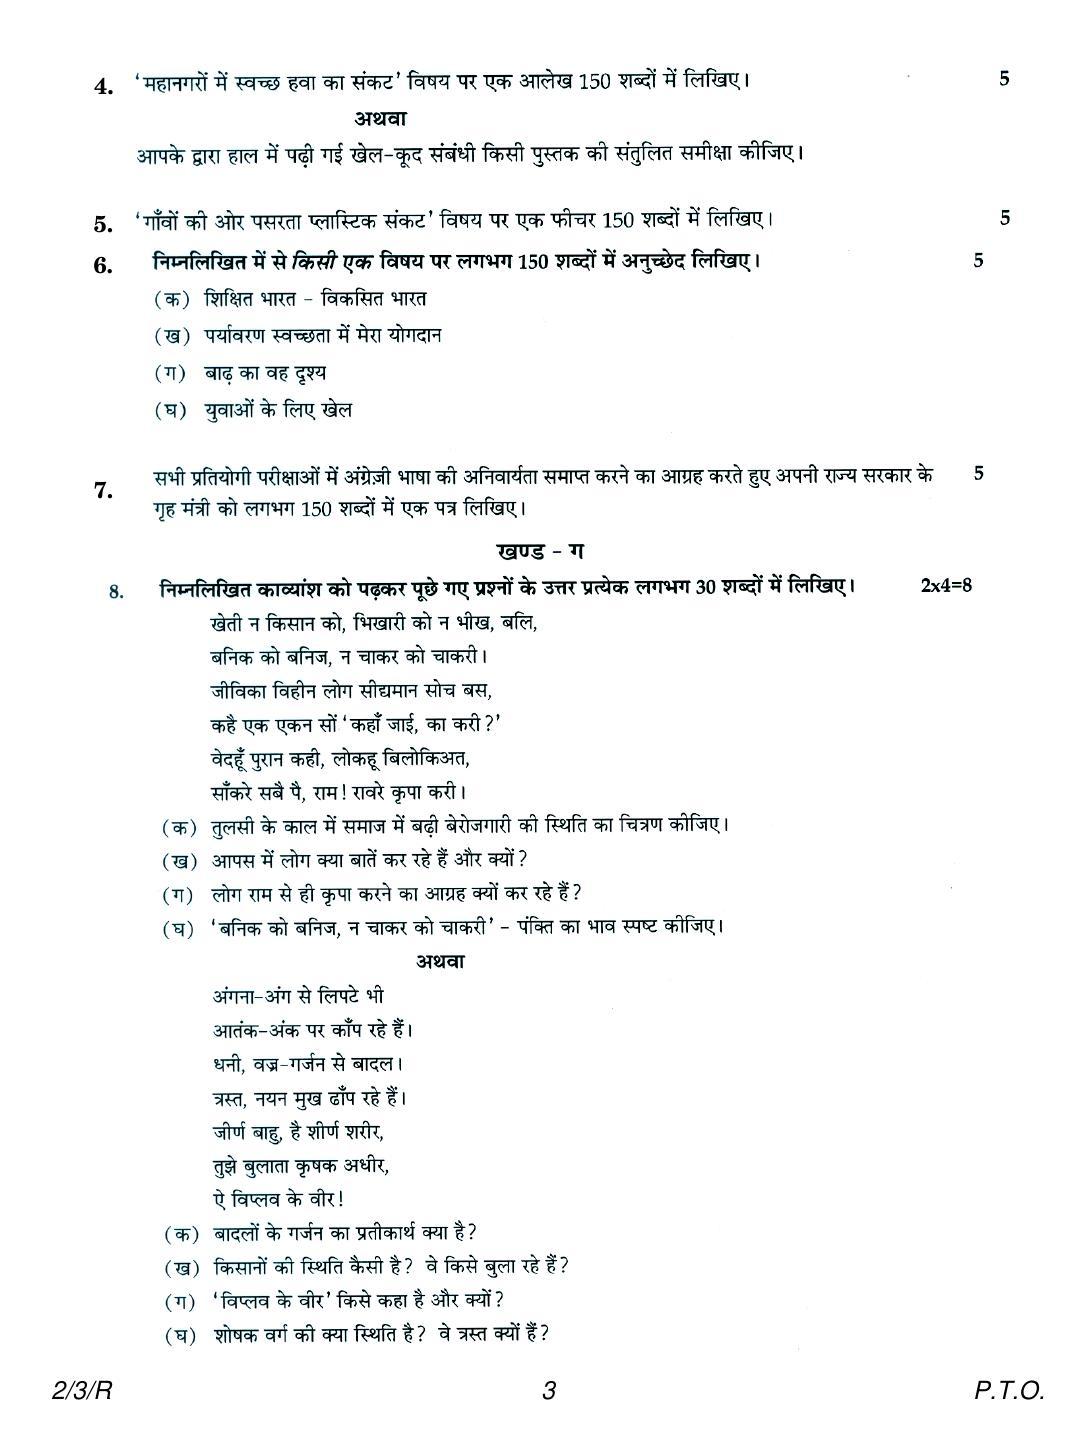 CBSE Class 12 2-3R HINDI CORE (SGN) 2018 Question Paper - Page 3